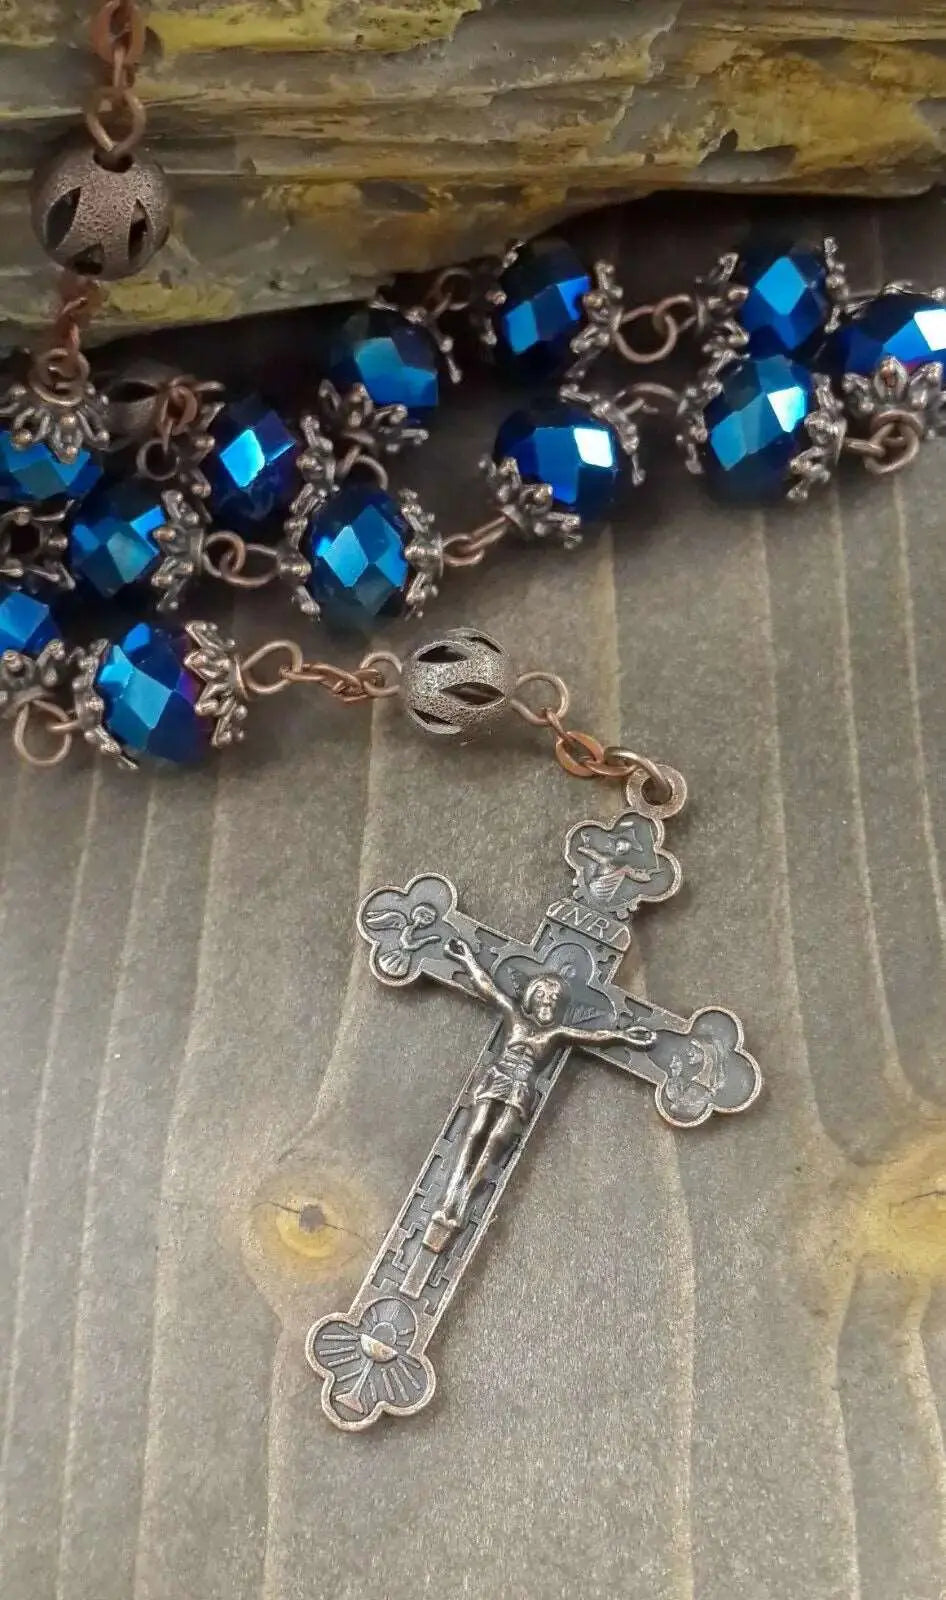 Large Deep Blue Crystal Beads Rosary Necklace Holy Soil Medal & Cross Crucifix Nazareth Store